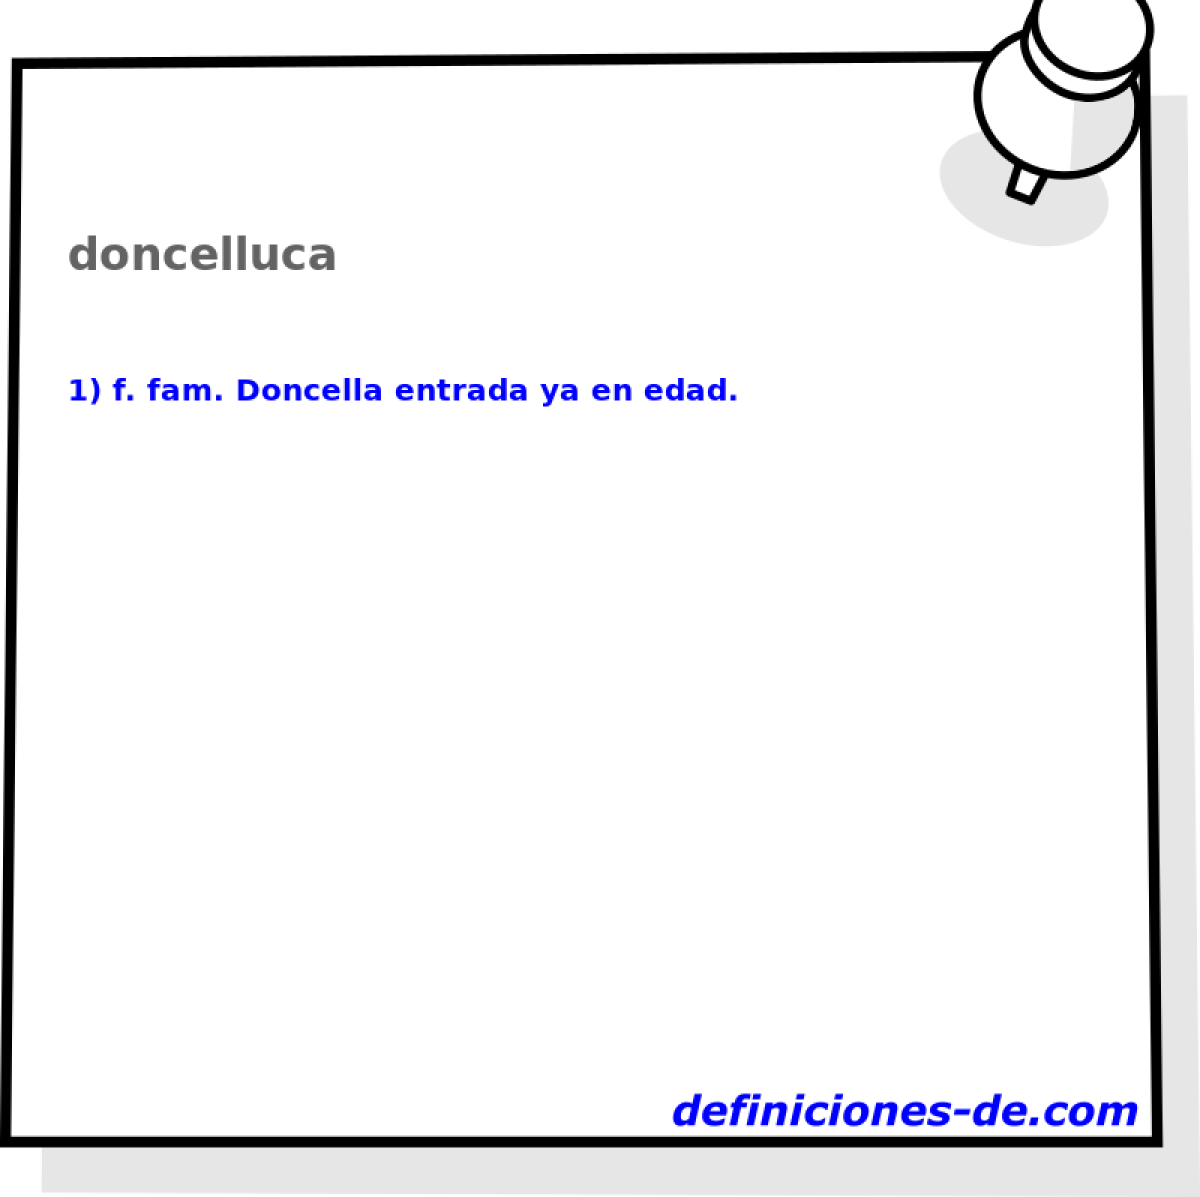 doncelluca 